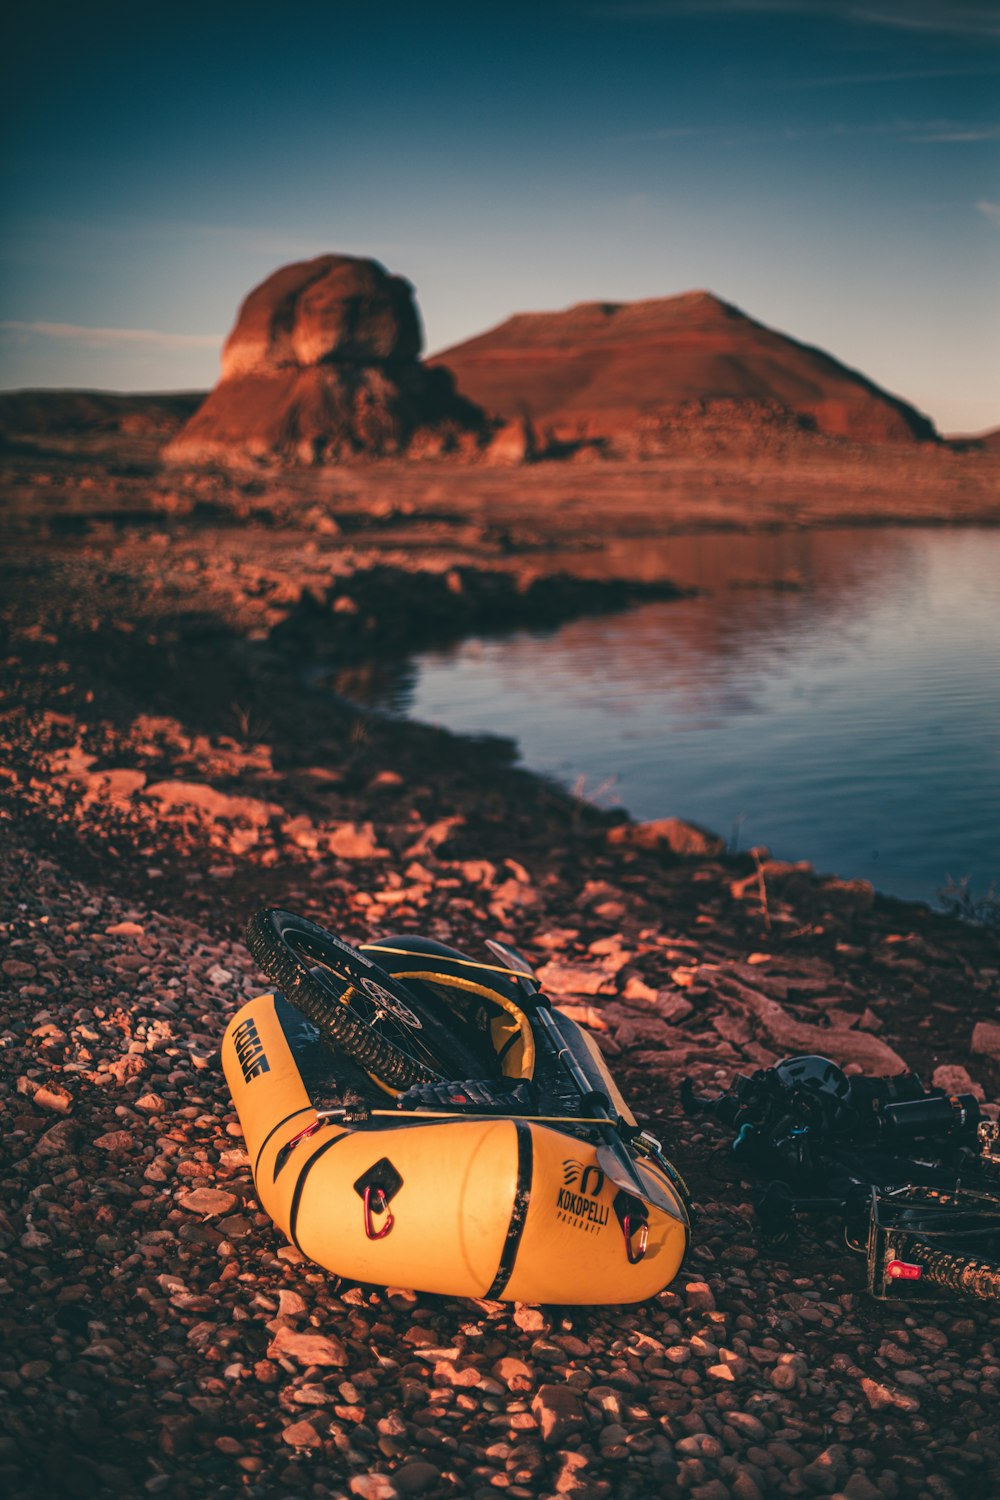 black and yellow inflatable raft near body of water